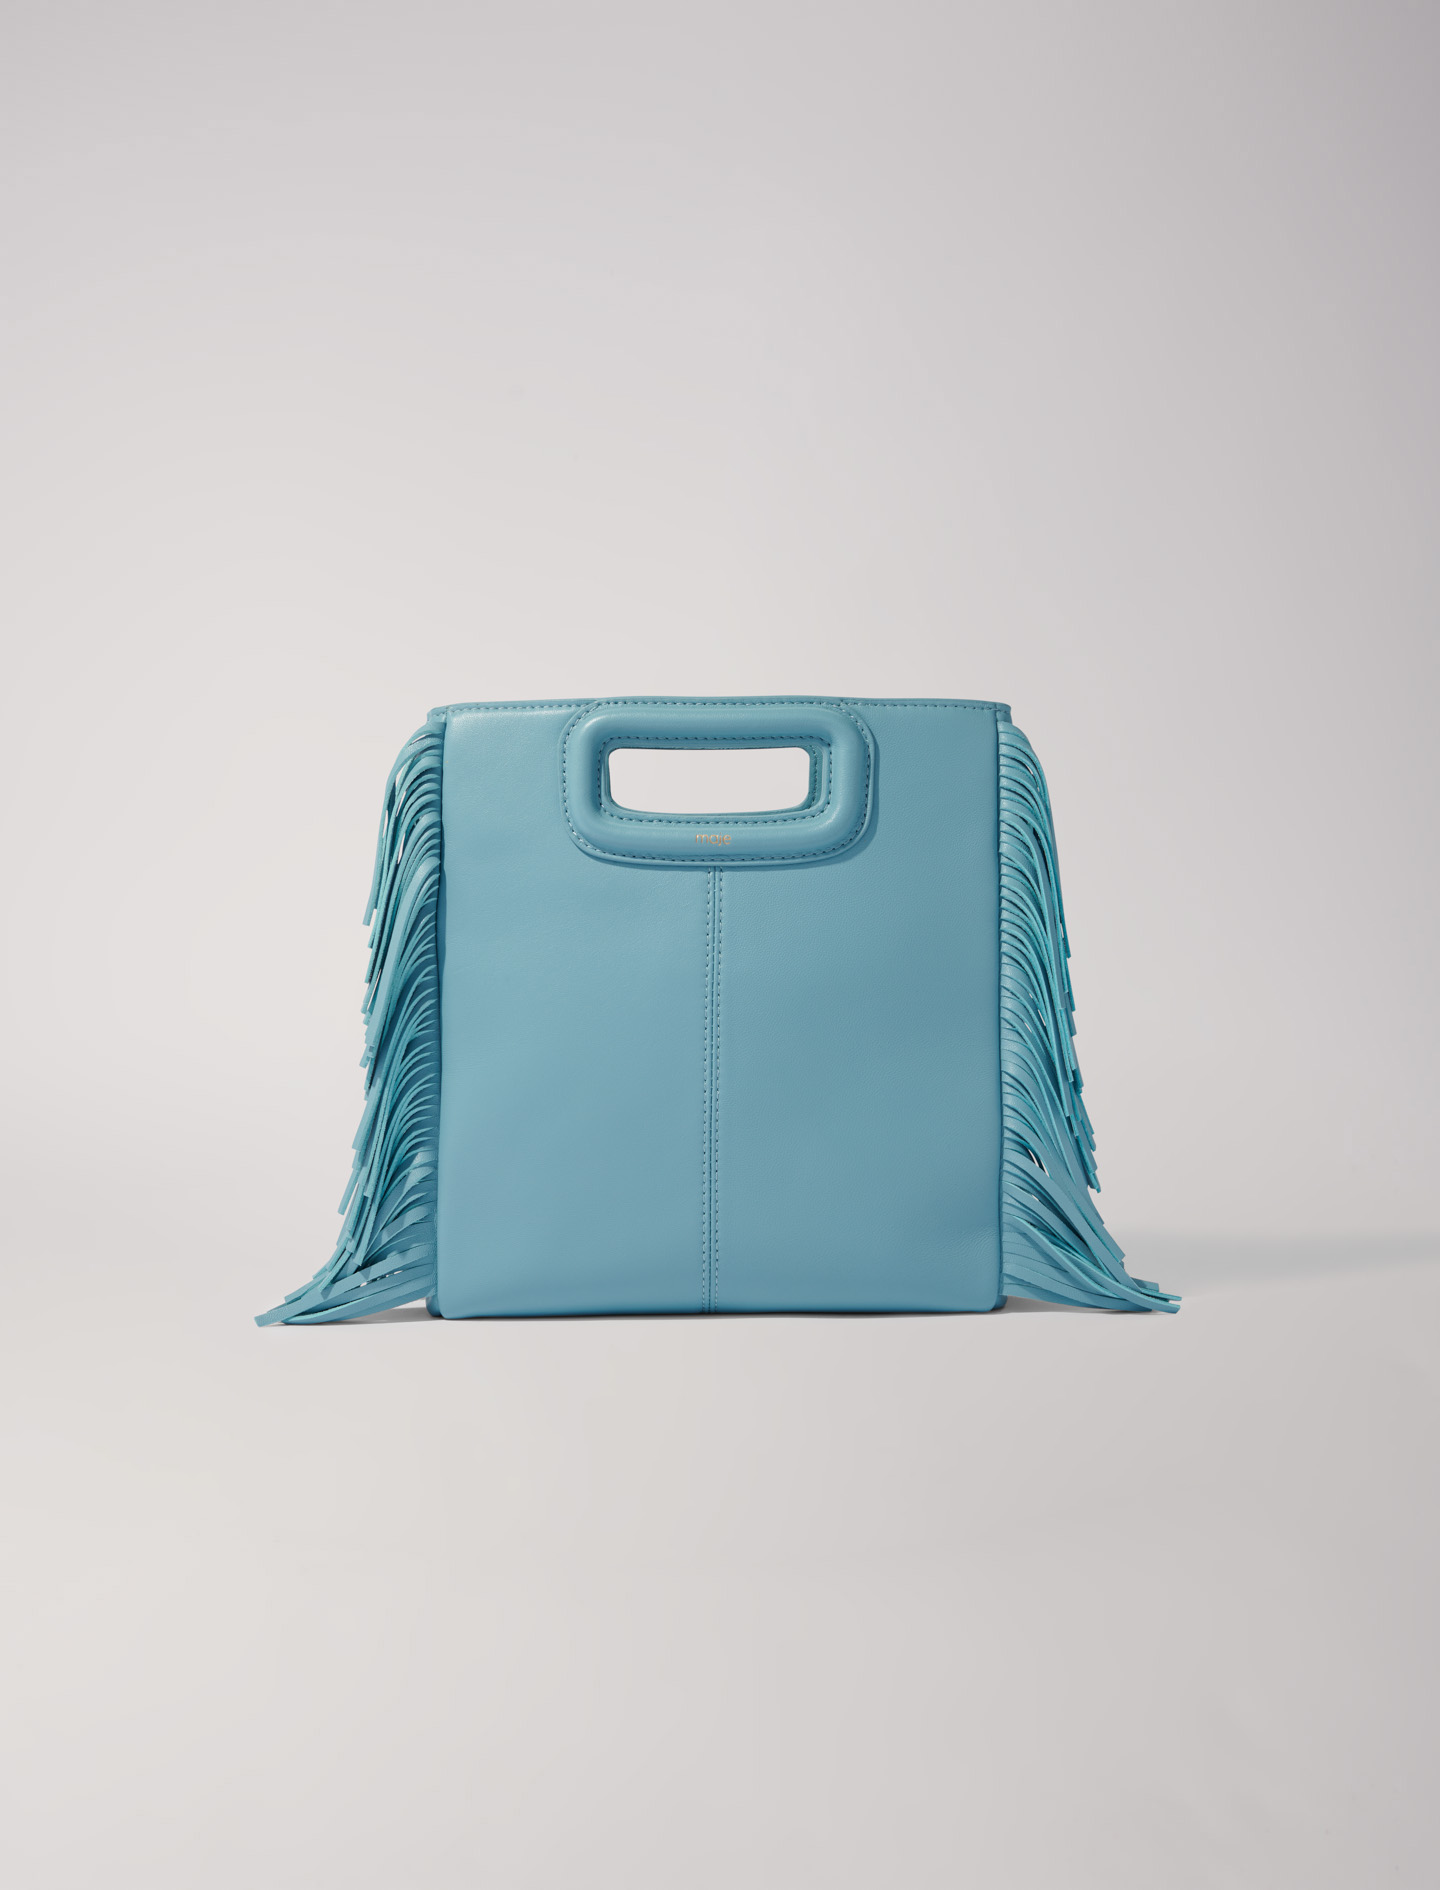 Mixte's polyester Leather: Smooth leather M bag with fringing for Spring/Summer, size Mixte-All Bags-OS (ONE SIZE), in color Blue / Grey /